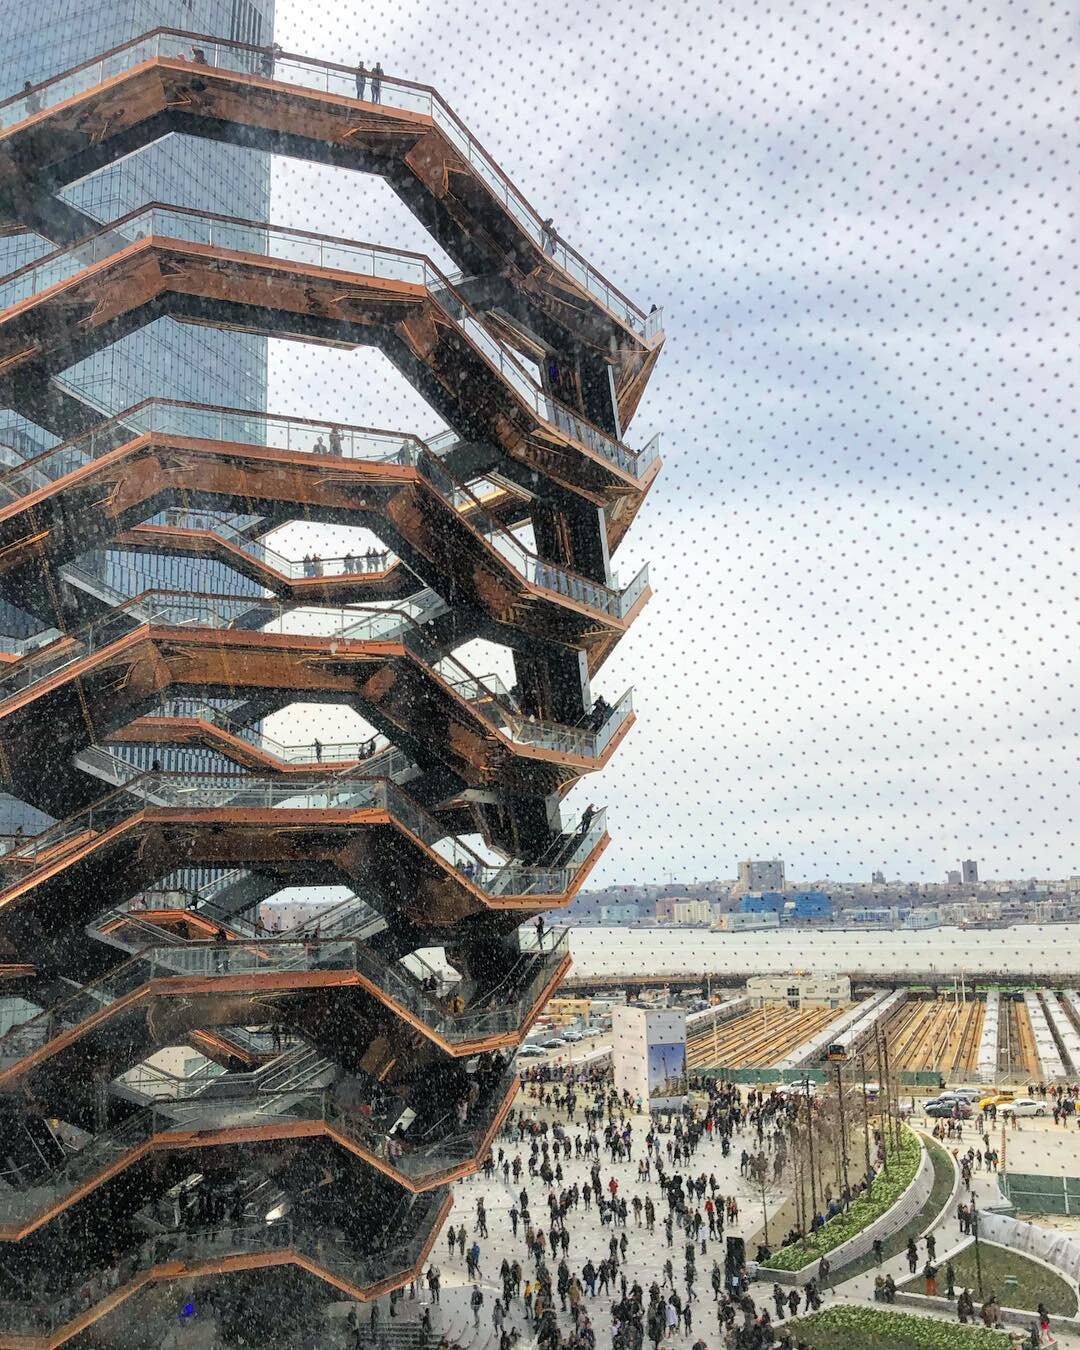 Magnifying your lenses #Kreativly #places #nyc #vessel #architecture #hellohudsonyards